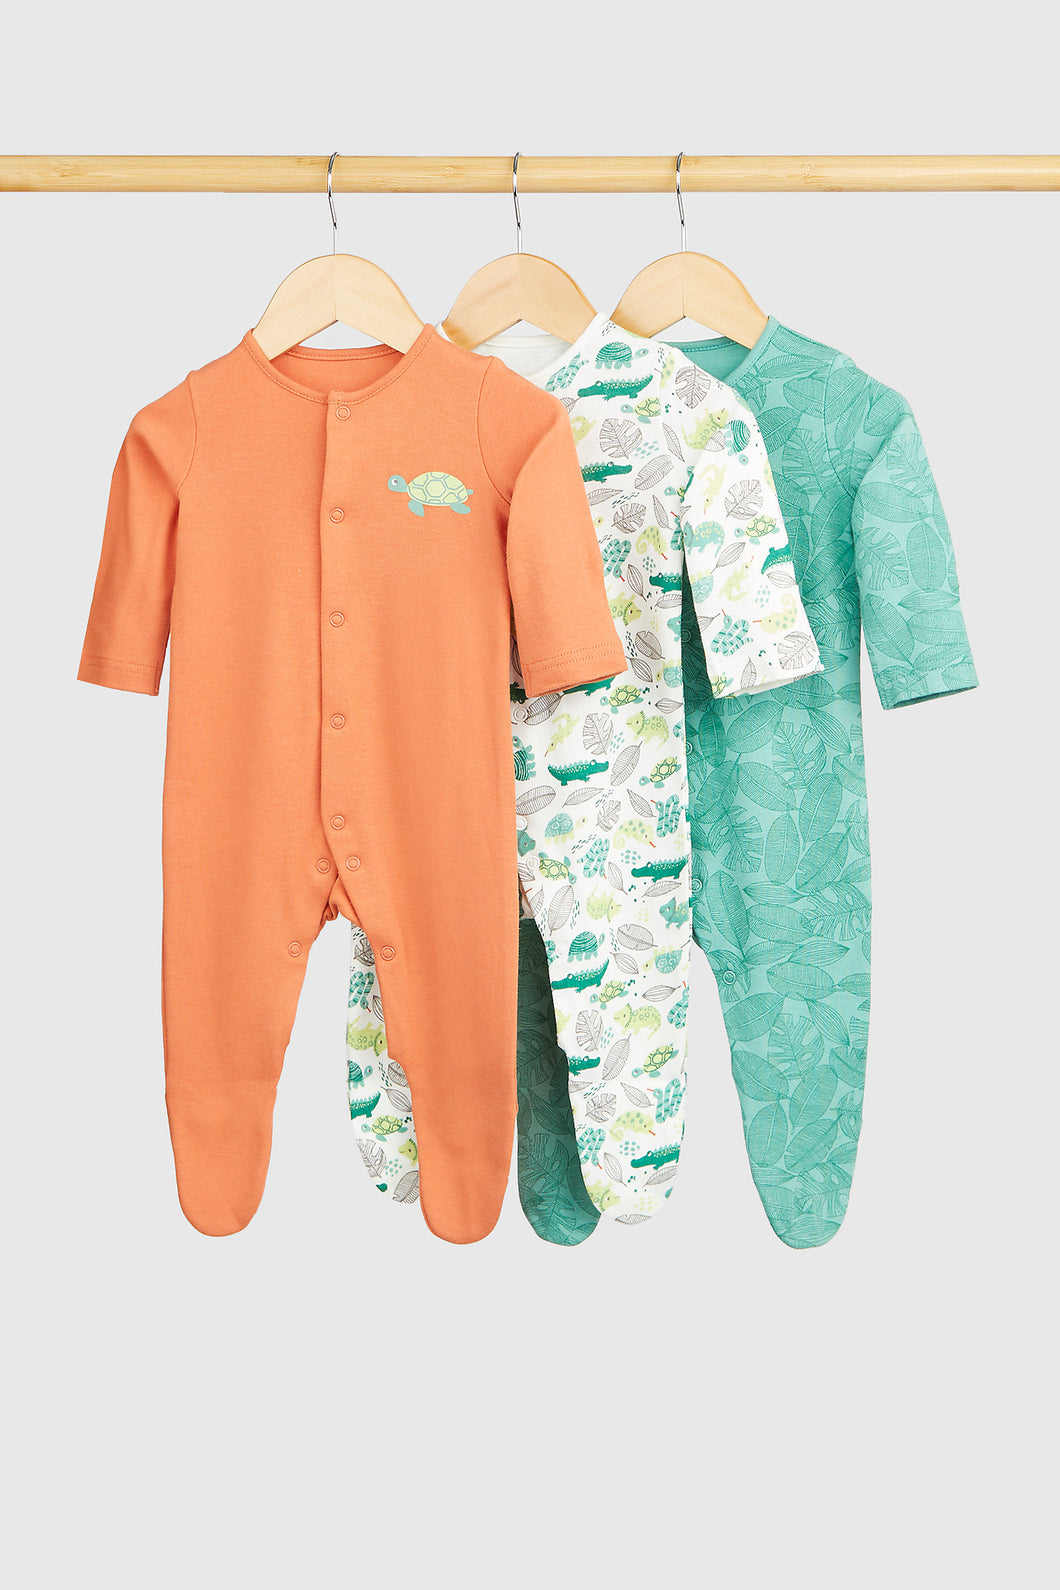 Mothercare Reptiles Baby Sleepsuits - 3 Pack